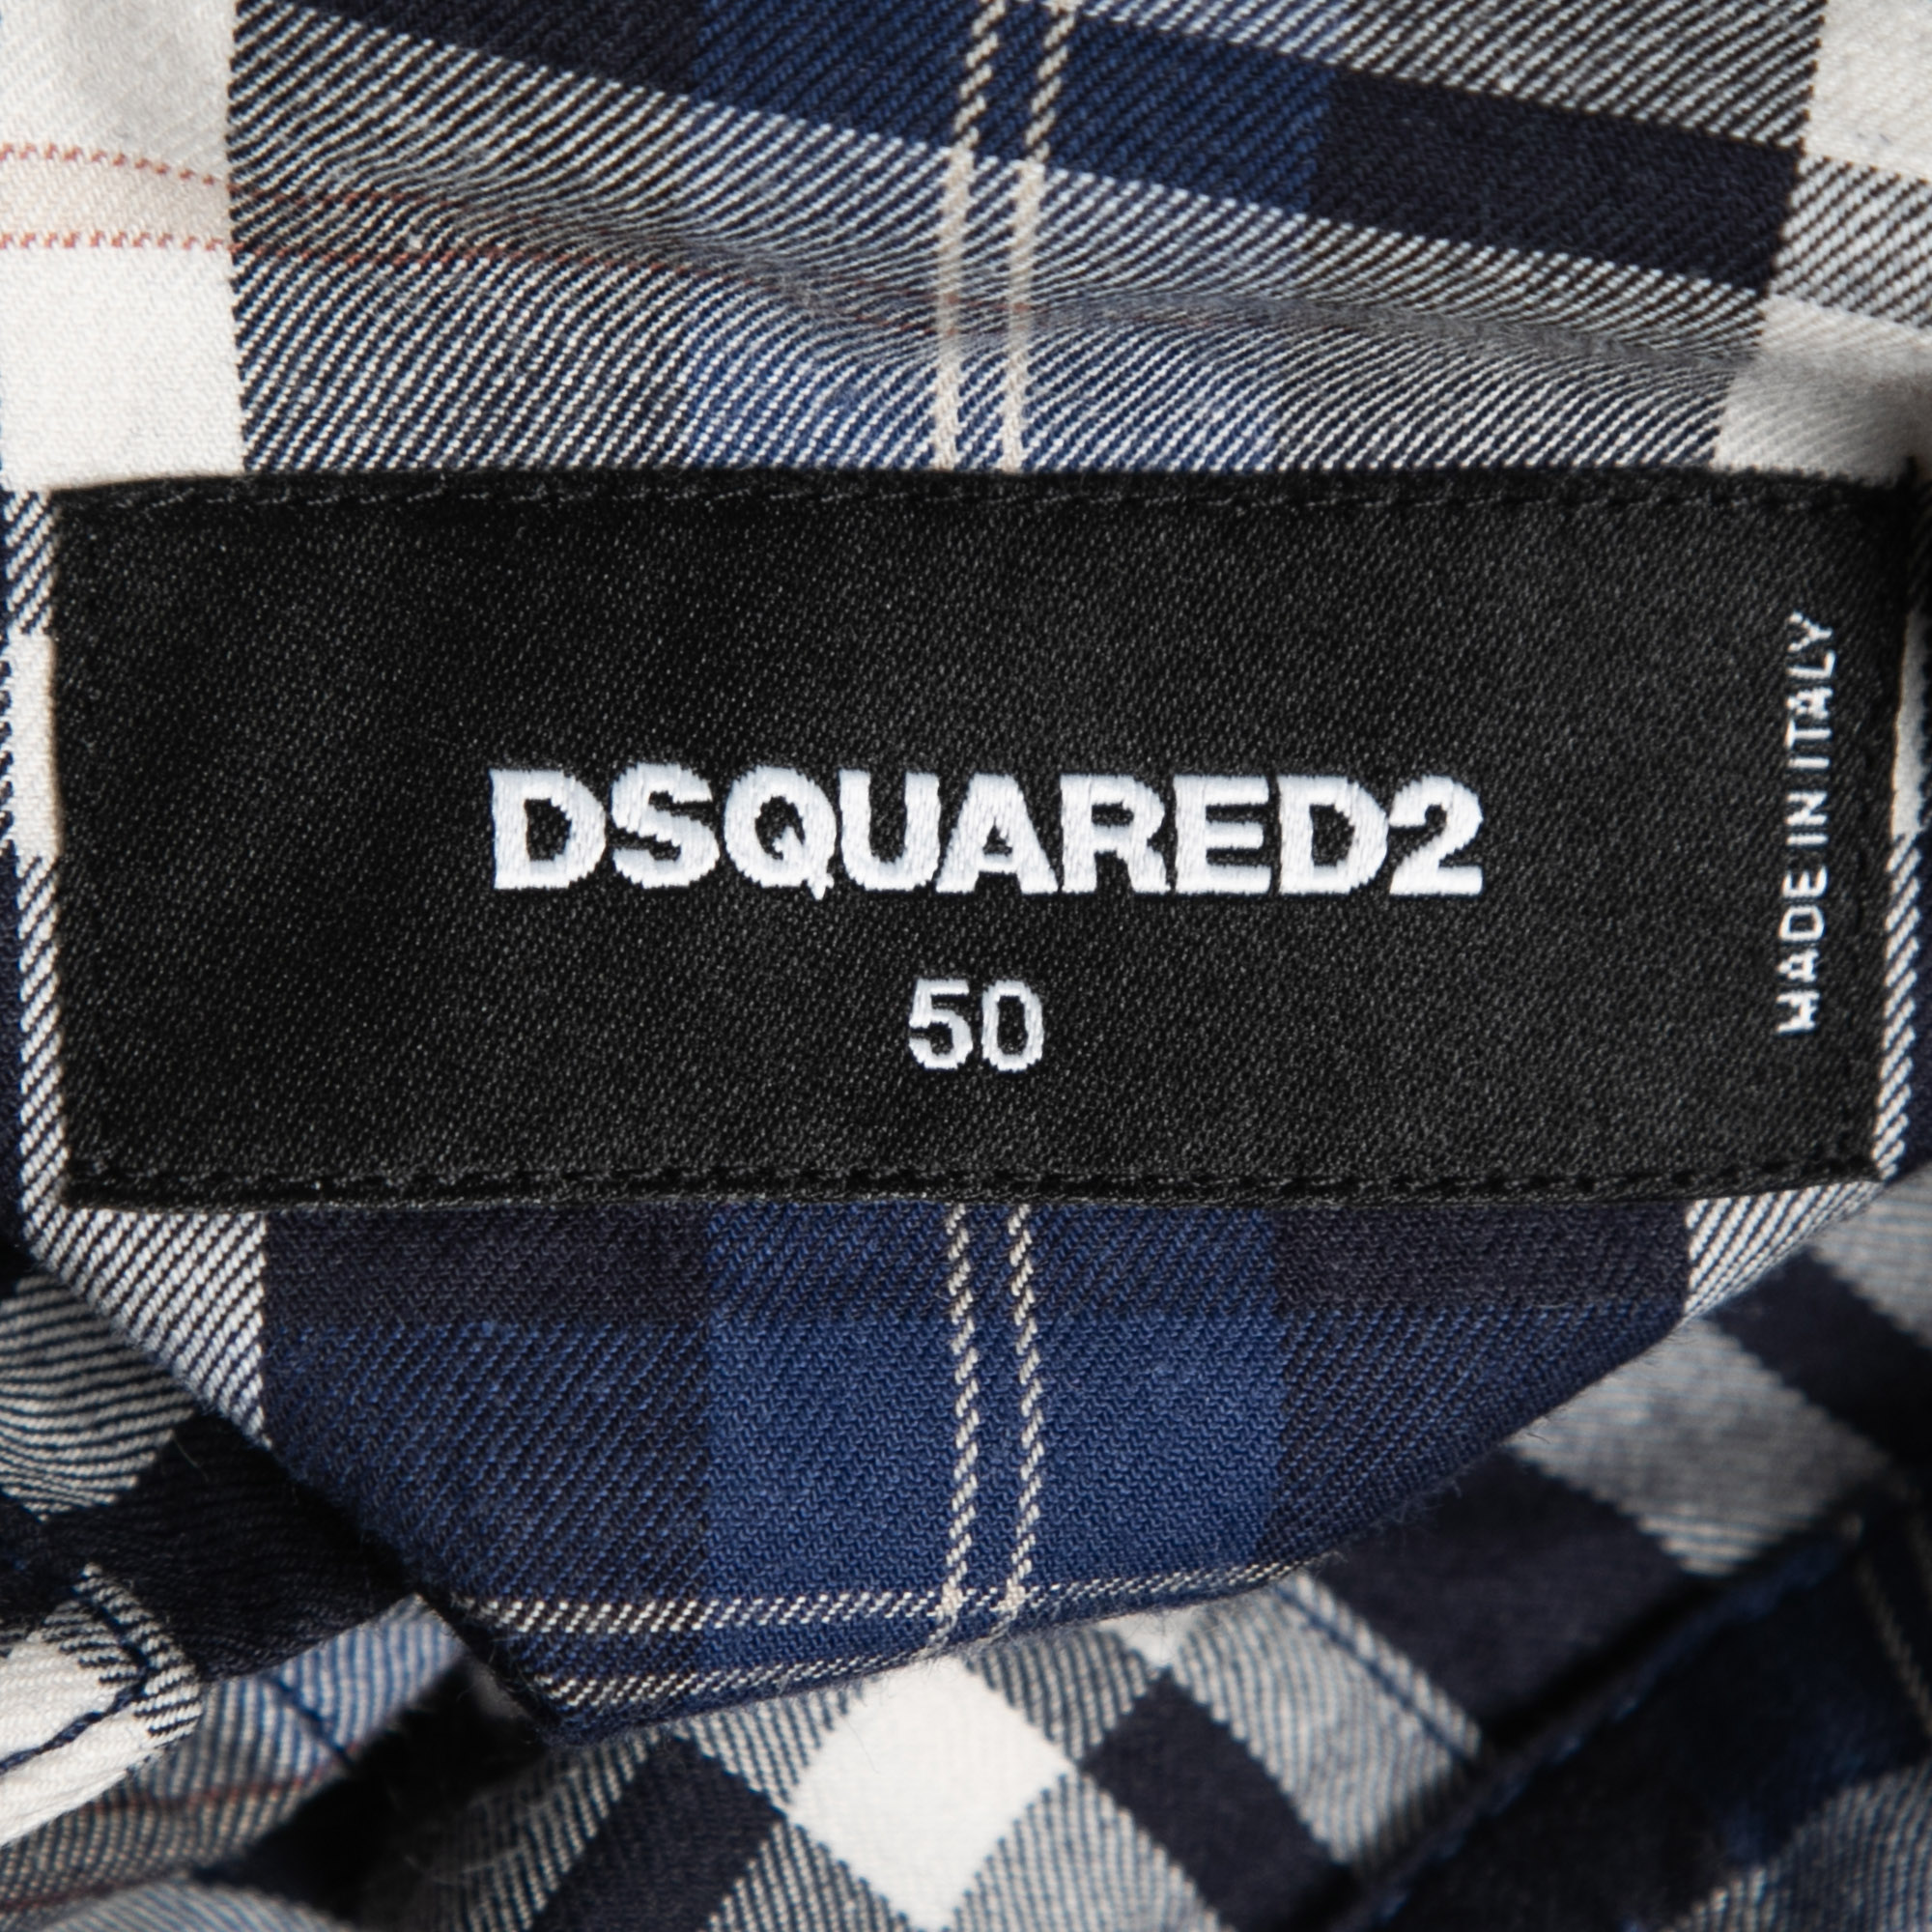 Dsquared2 Blue Checked Cotton Long Sleeve Shirt L